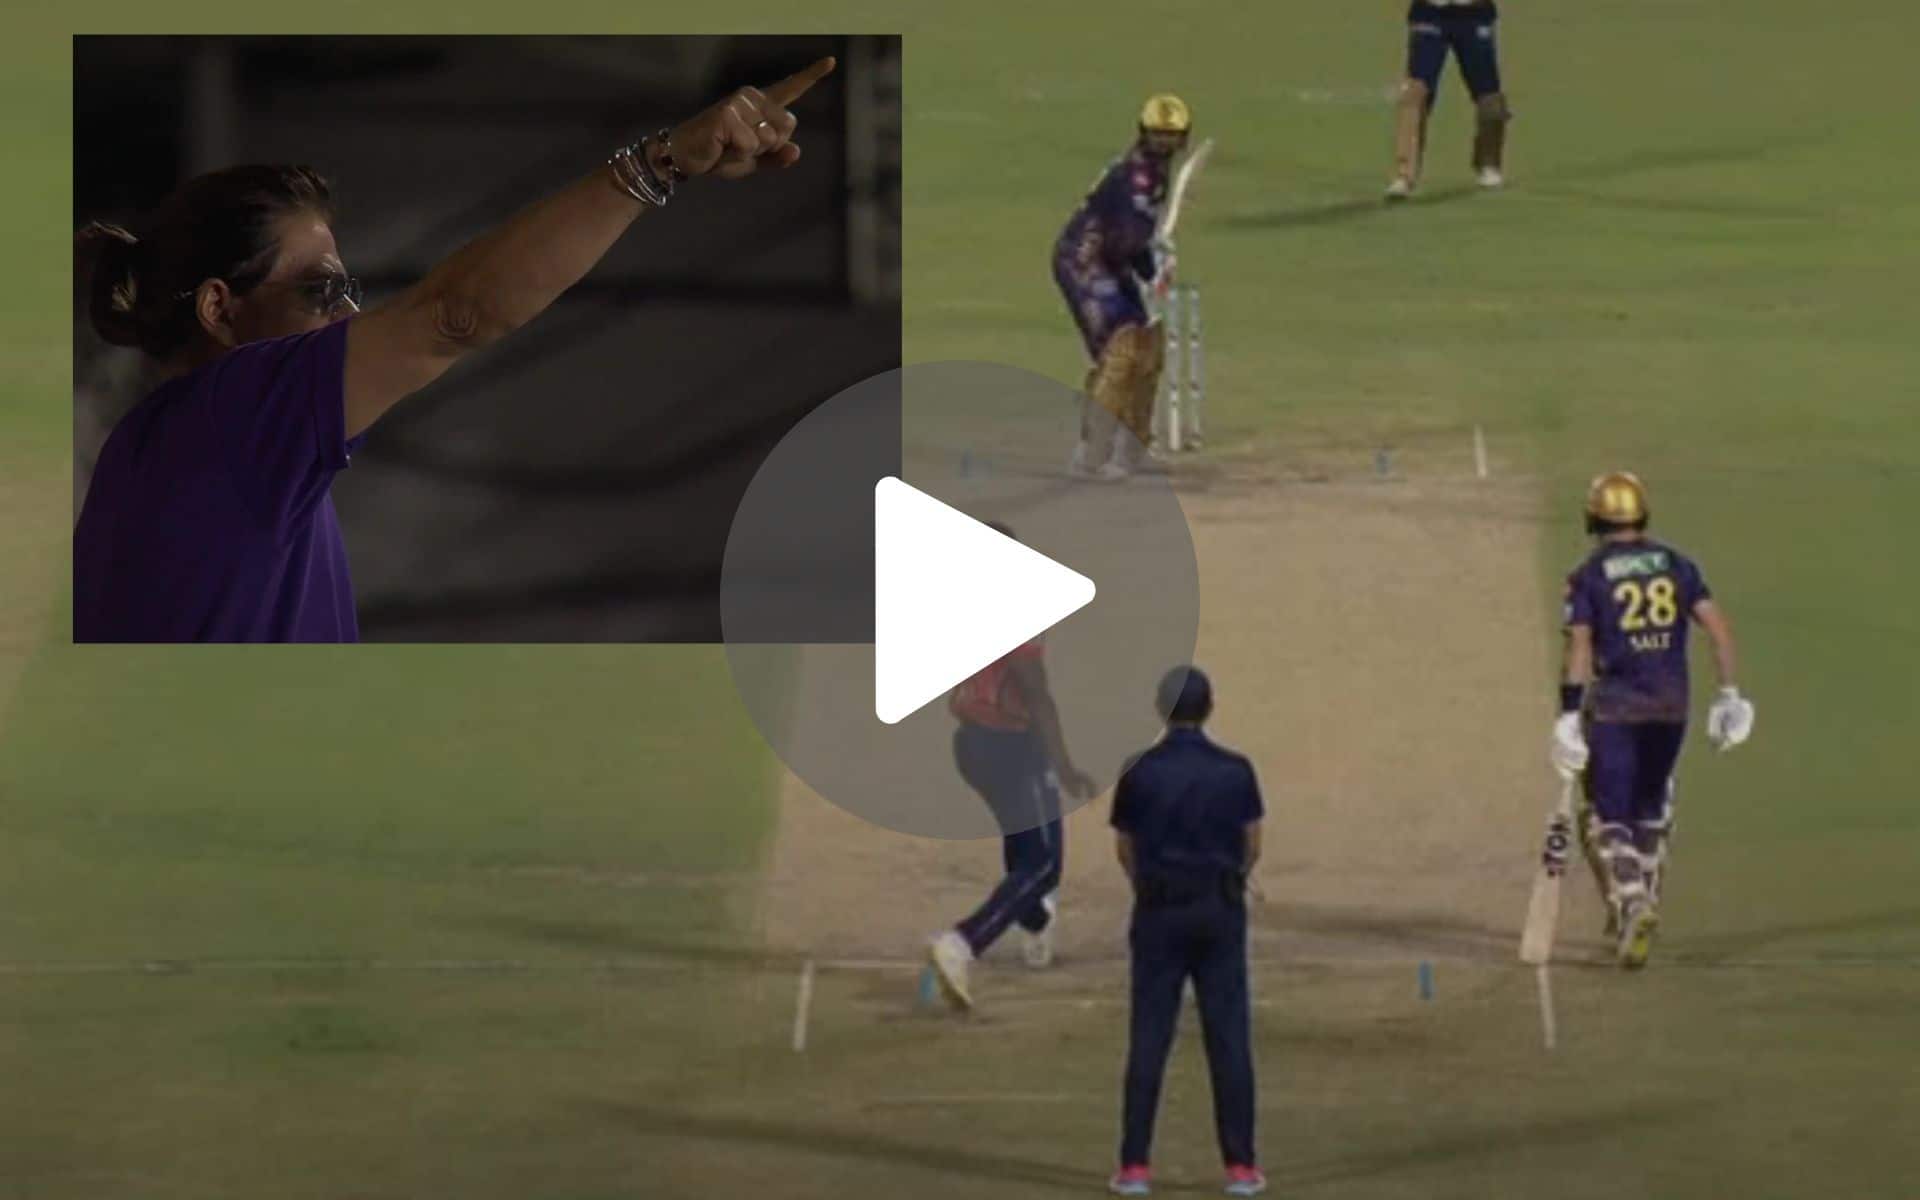 [Watch] SRK's 'You Are The Man' Moment With Sunil Narine As He Scores Fifty Like 'Baazigar'